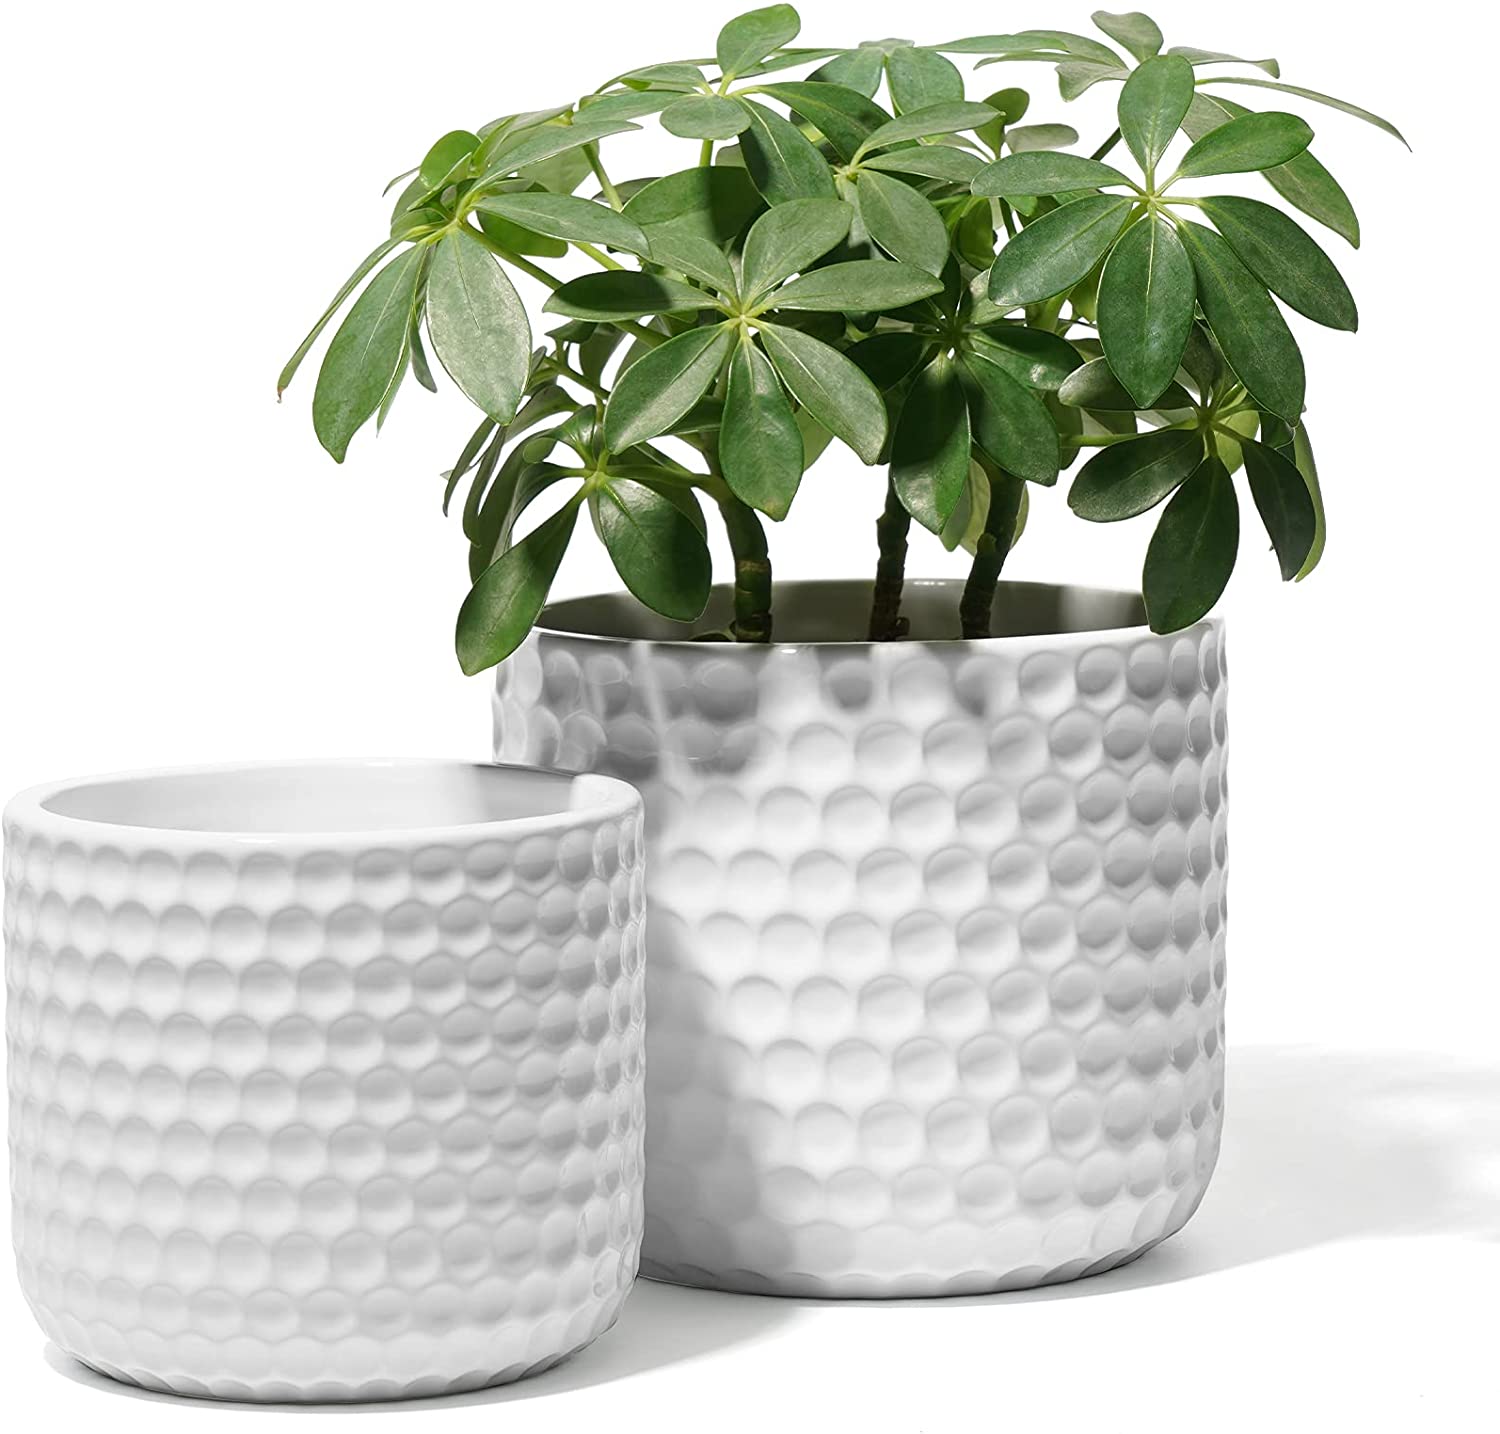 2 PC POTEY 6 and 5 Inch Ceramic Planter (Various) $11.99 + Free Shipping w/ Prime or orders $25+